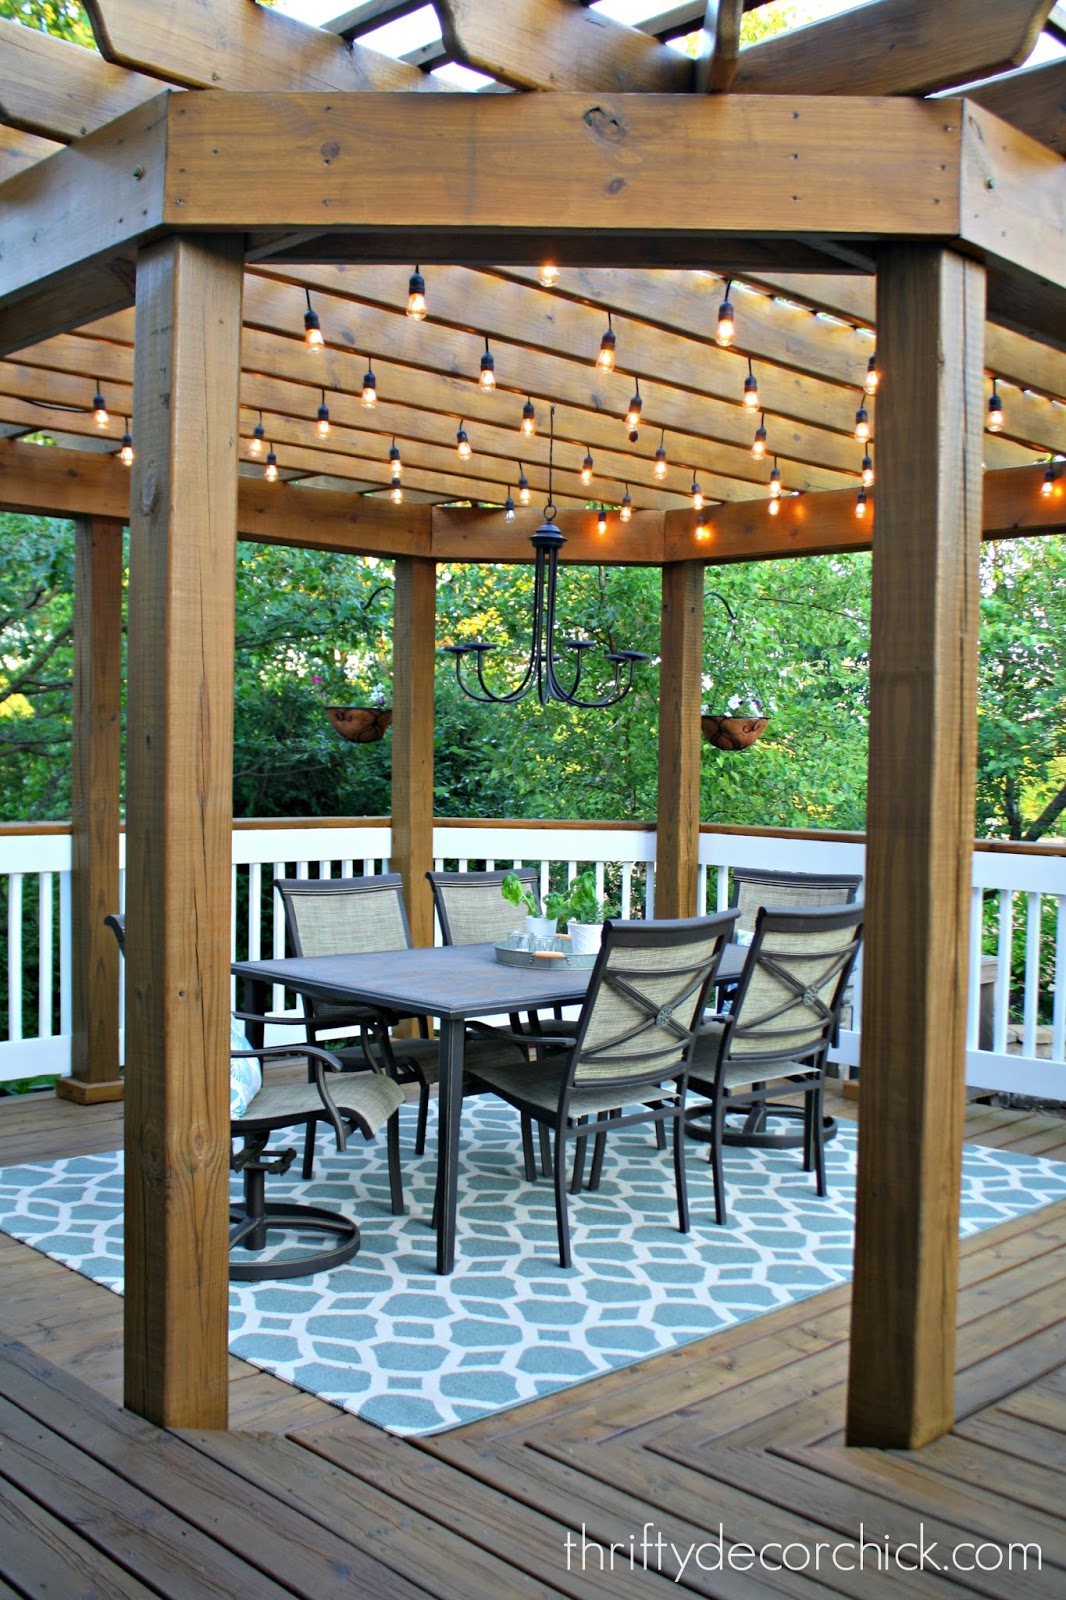 Our beautiful outdoor dining room from Thrifty Decor Chick